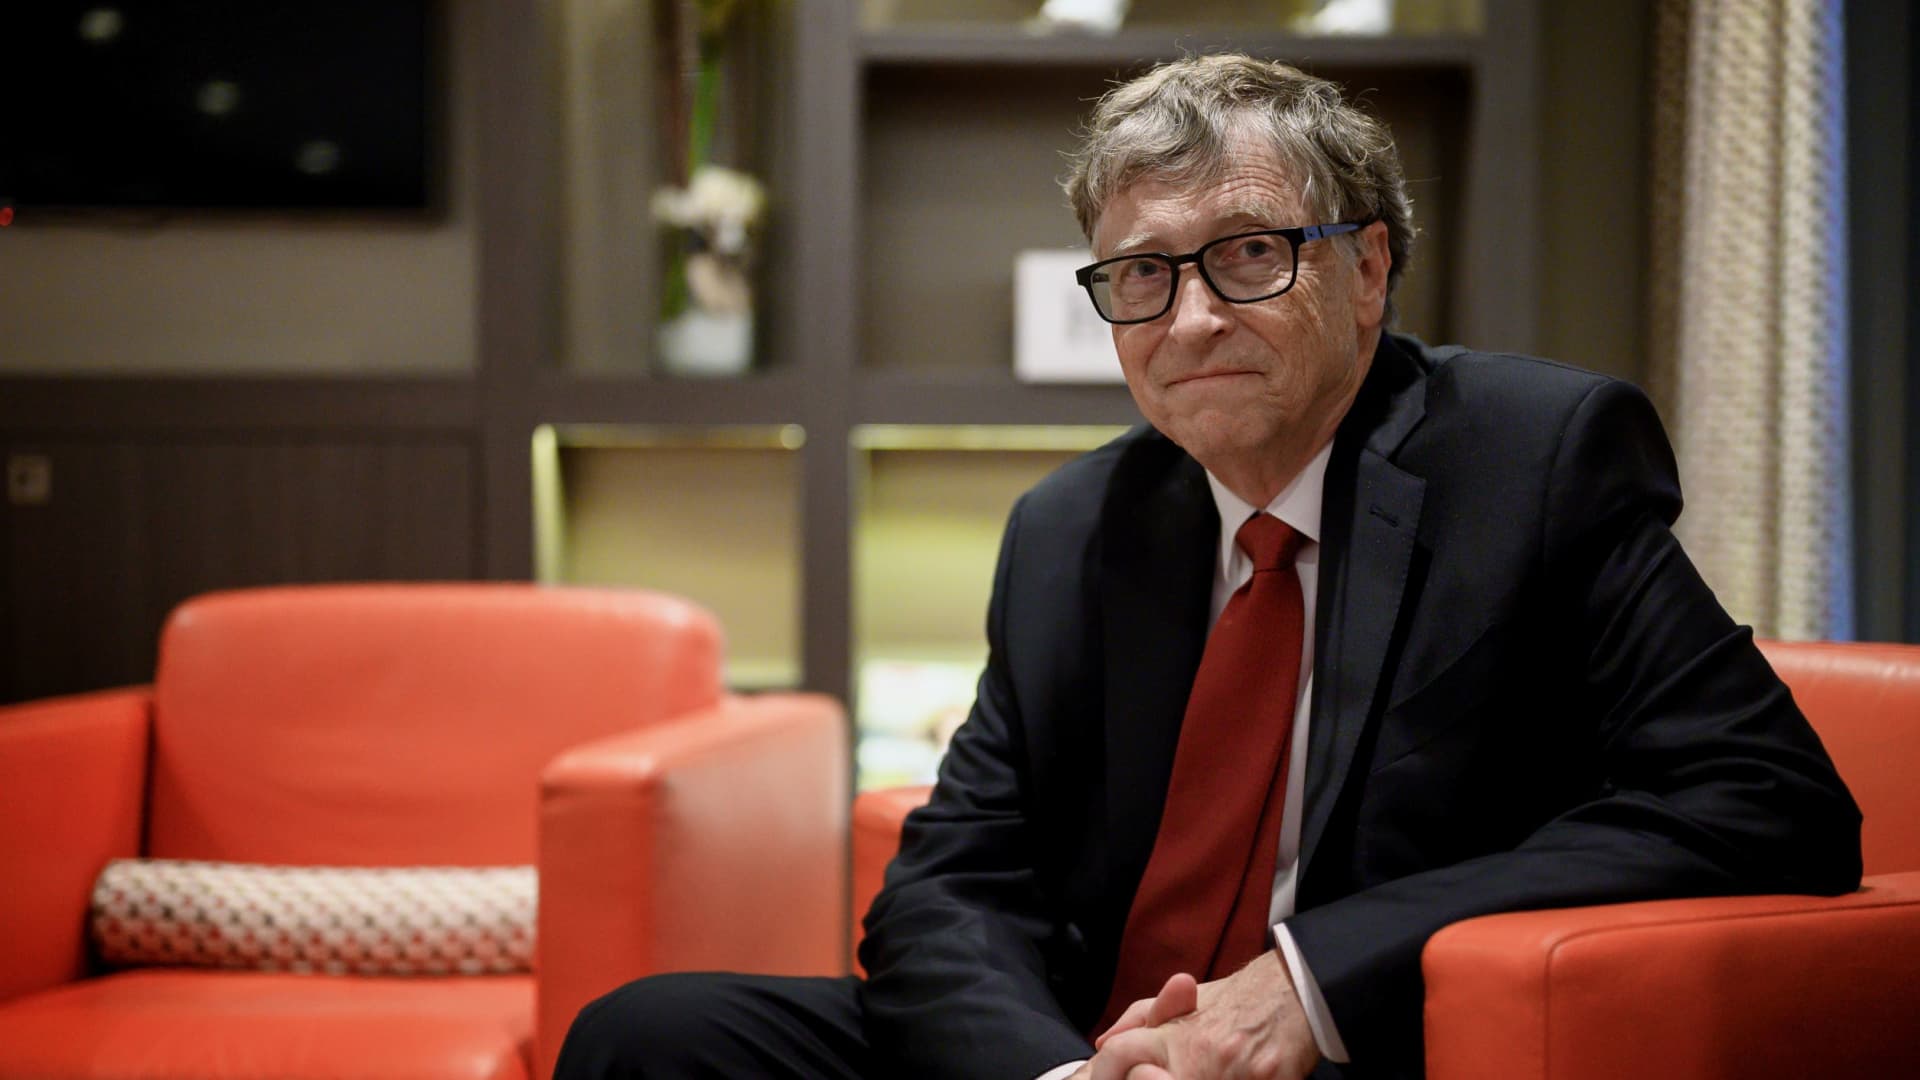 4 things Bill Gates did wrong on his 1974 Harvard student resume, from experts: 'He even has his dorm room number'